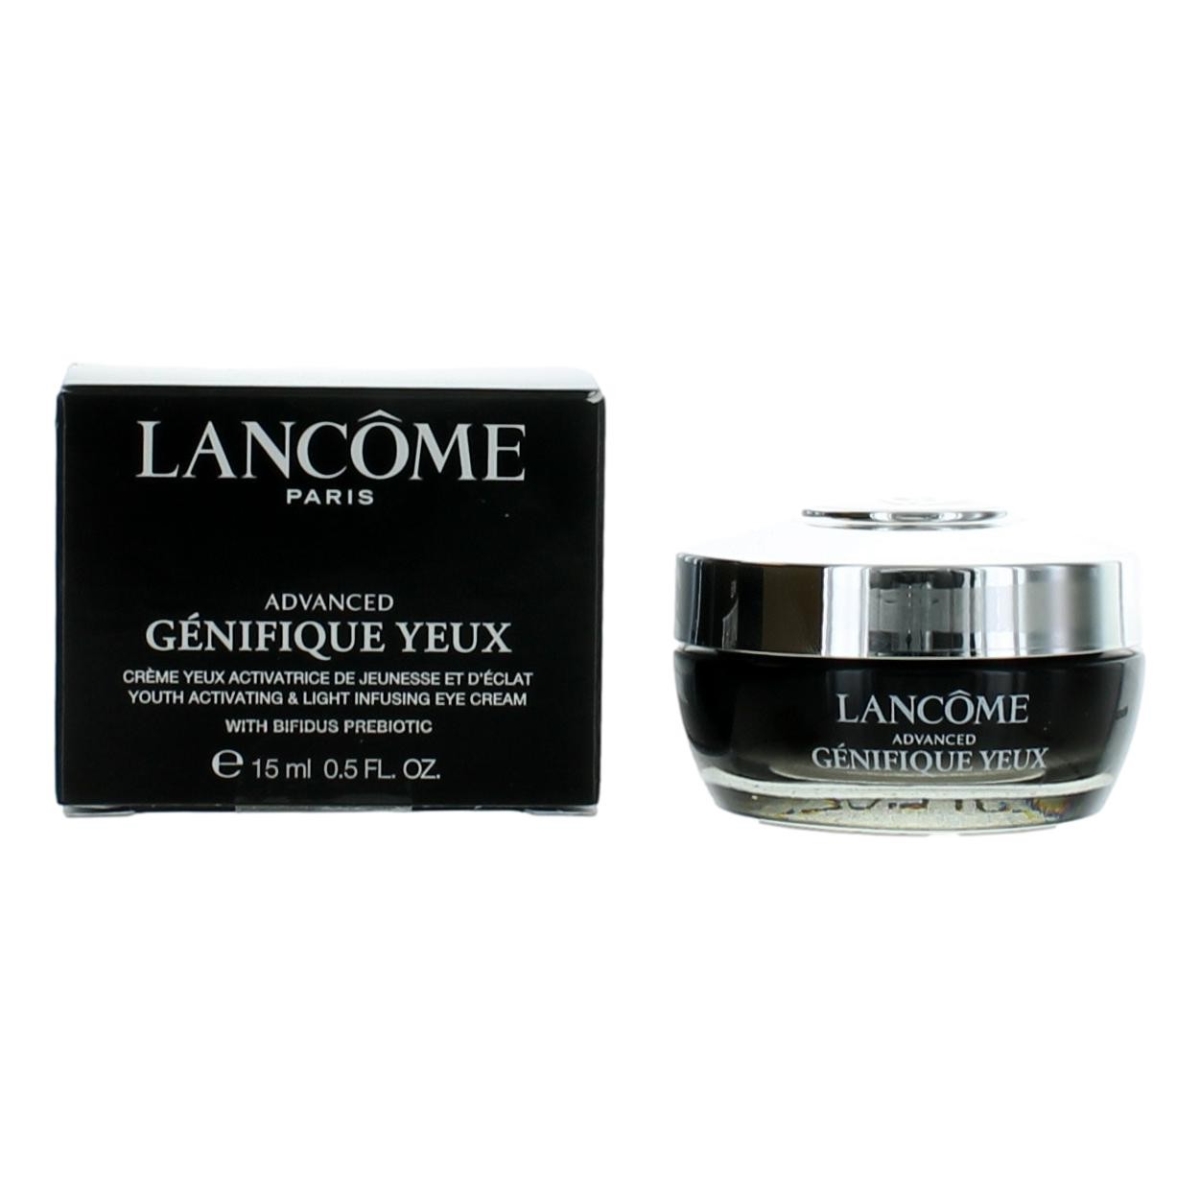 Lancome awlangyliec05 0.5 oz Advanced Genifique Yeux Youth Activating & Light Infusing Eye Cream